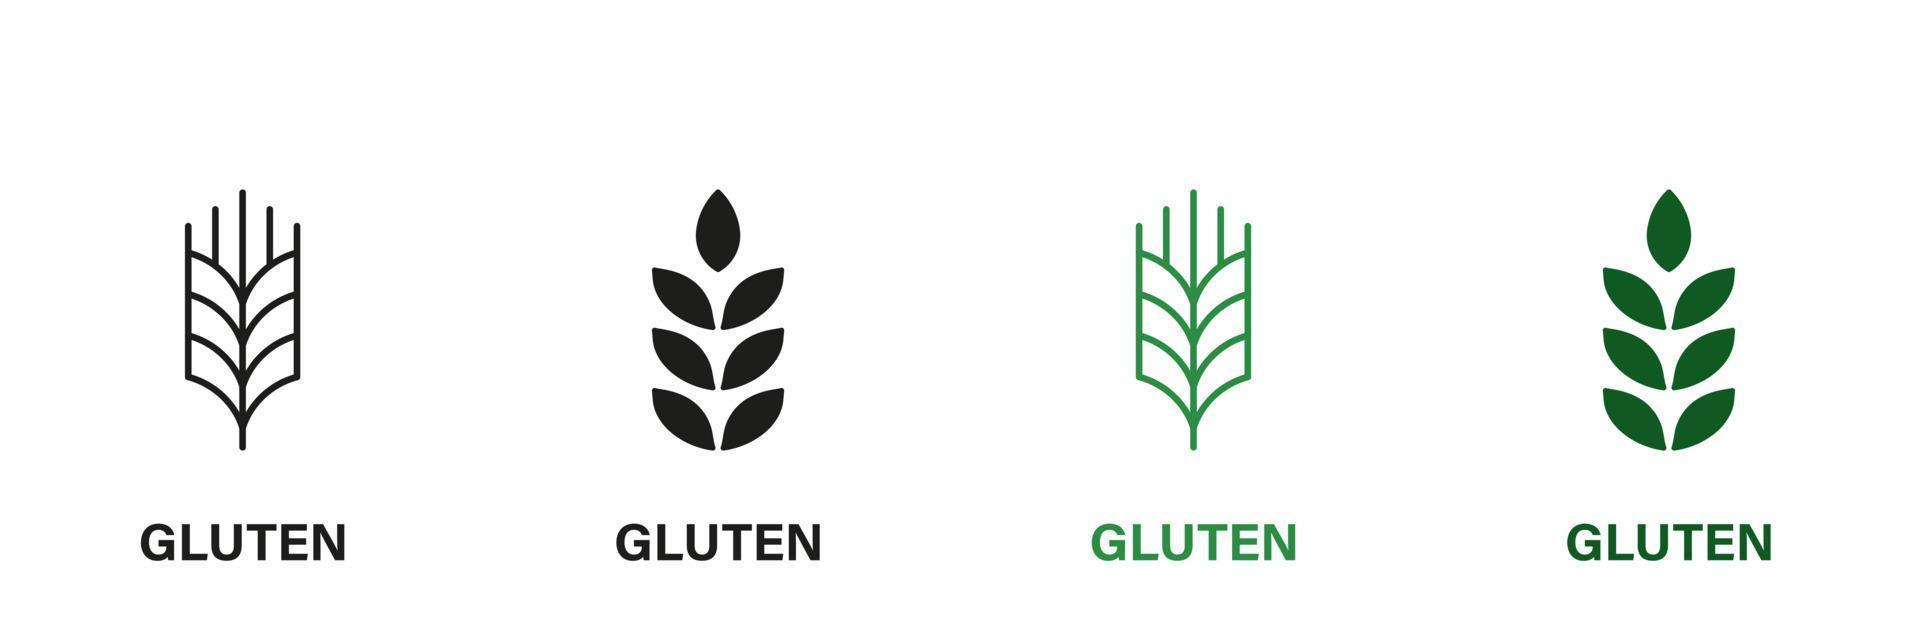 Gluten Ingredients Line and Silhouette Icon Set. Wheat Allergy Product Green and Black Pictogram. Organic Cereal Seed Symbol Collection on White Background. Isolated Vector Illustration.